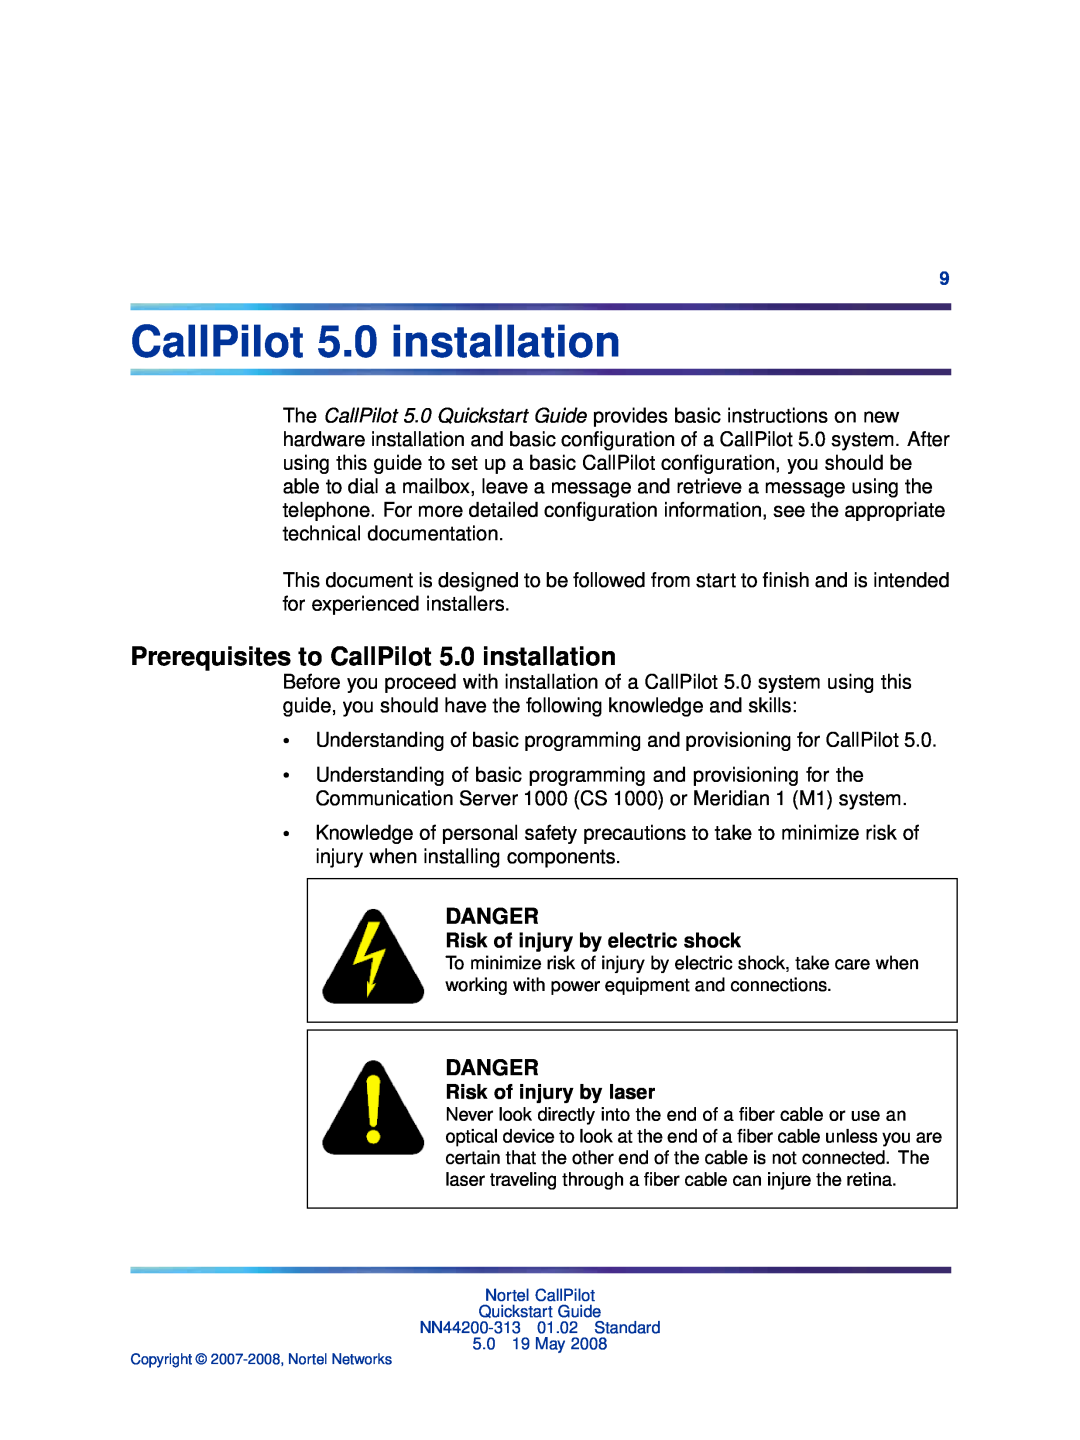 Nortel Networks NN44200-313 Prerequisites to CallPilot 5.0 installation, Danger, Risk of injury by electric shock 